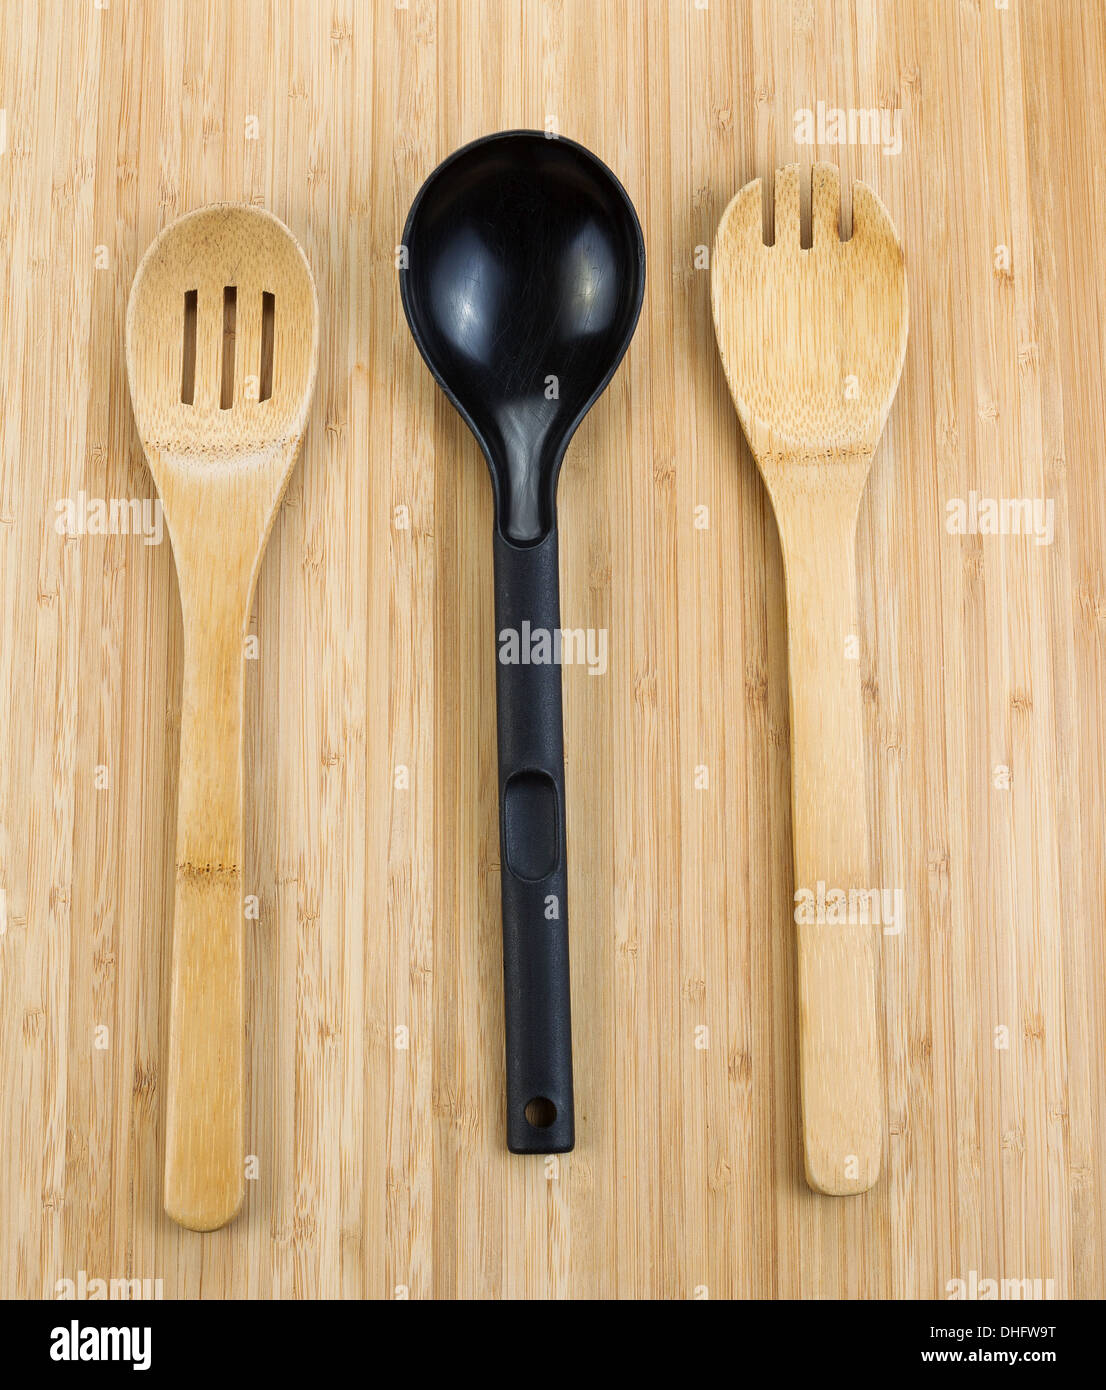 Vertical photo of three kitchen spoons, two of them wooden, on natural bamboo wood Stock Photo